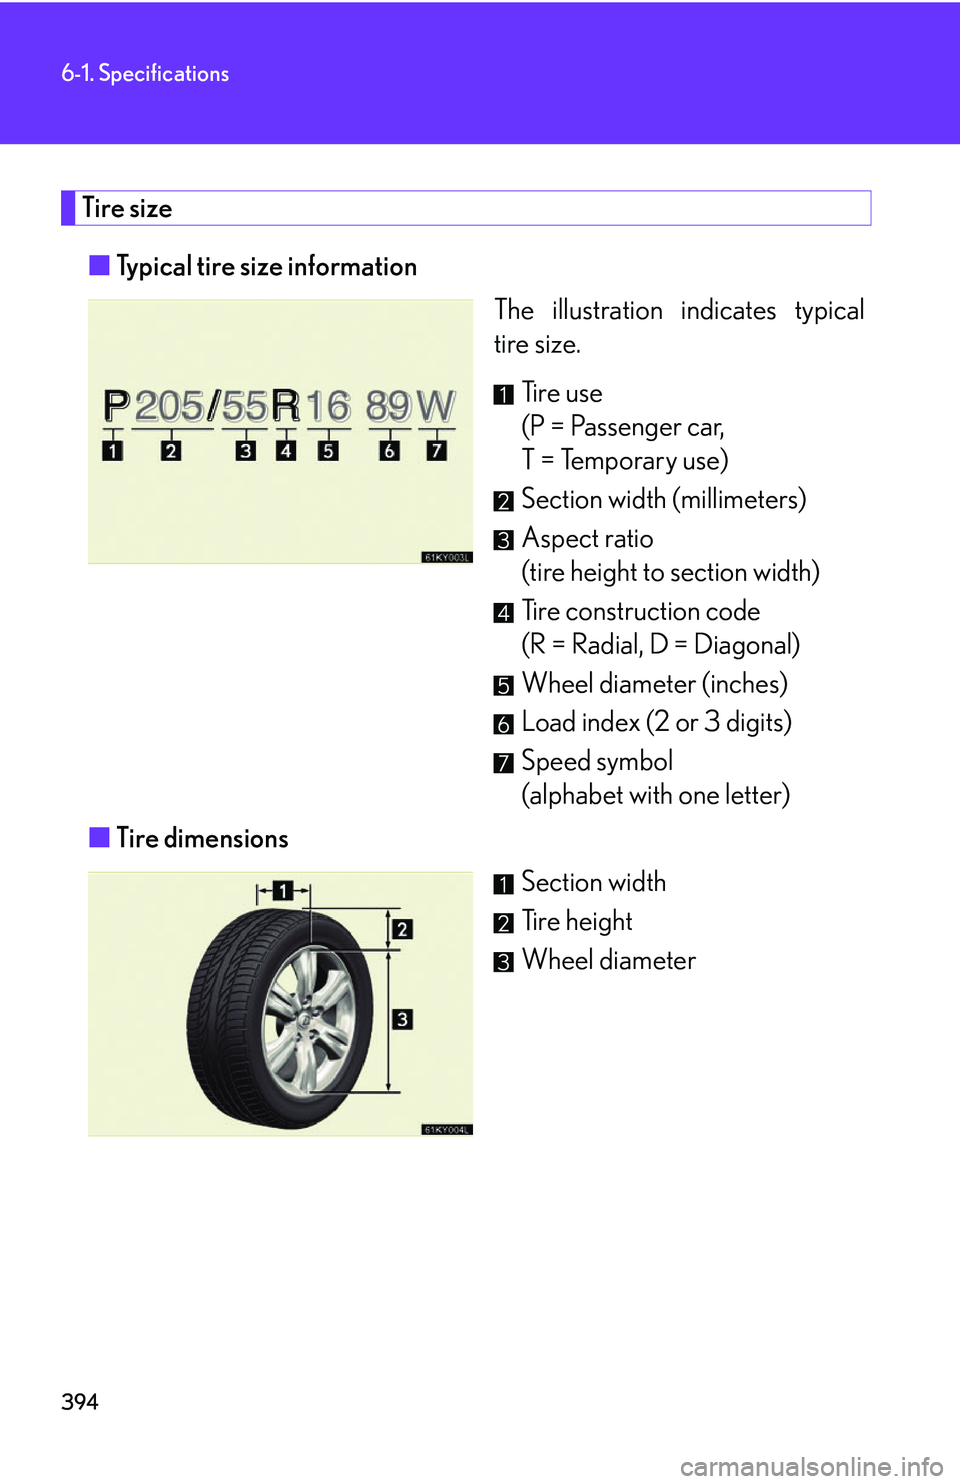 Lexus IS250 2006  Lexus Parking Assist-sensor / LEXUS 2006 IS350/250 FROM MAY 2006 PROD. OWNERS MANUAL (OM53619U) 394
6-1. Specifications
Tire size■ Typical tire size information
The illustration indicates typical
tire size.
Ti r e  u s e
(P = Passenger car, 
T = Temporary use)
Section width (millimeters)
Aspec